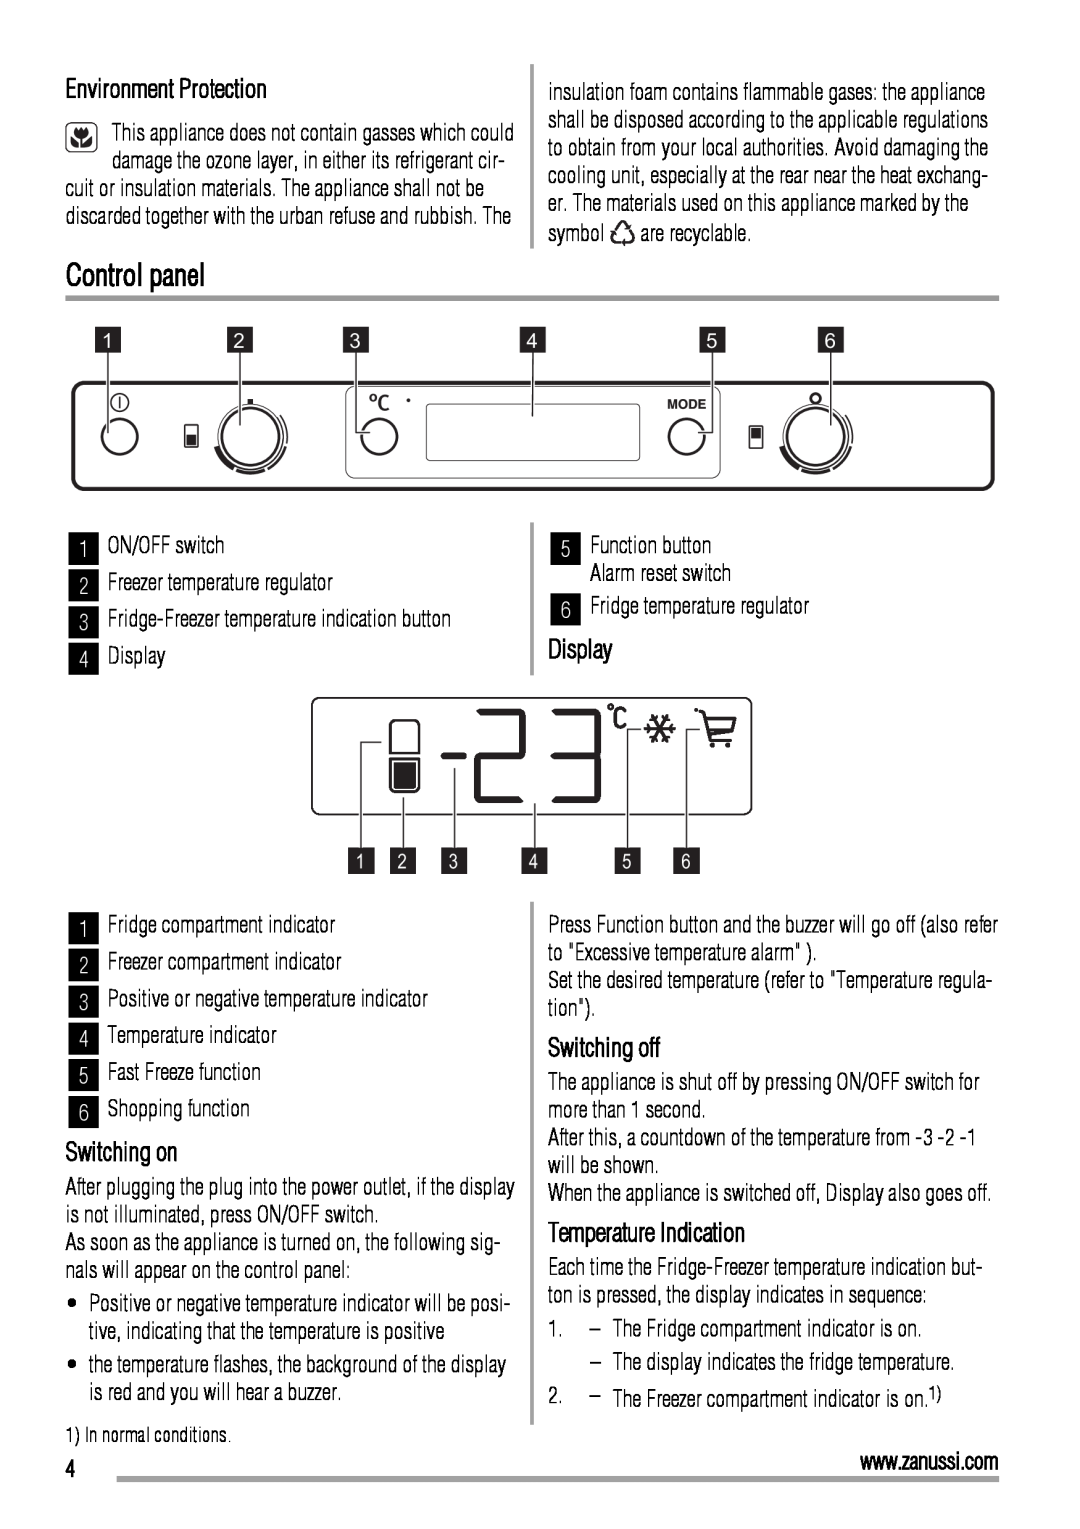 Zanussi ZBB26650SA Control panel, Environment Protection, Display, Switching on, Switching off, Temperature Indication 